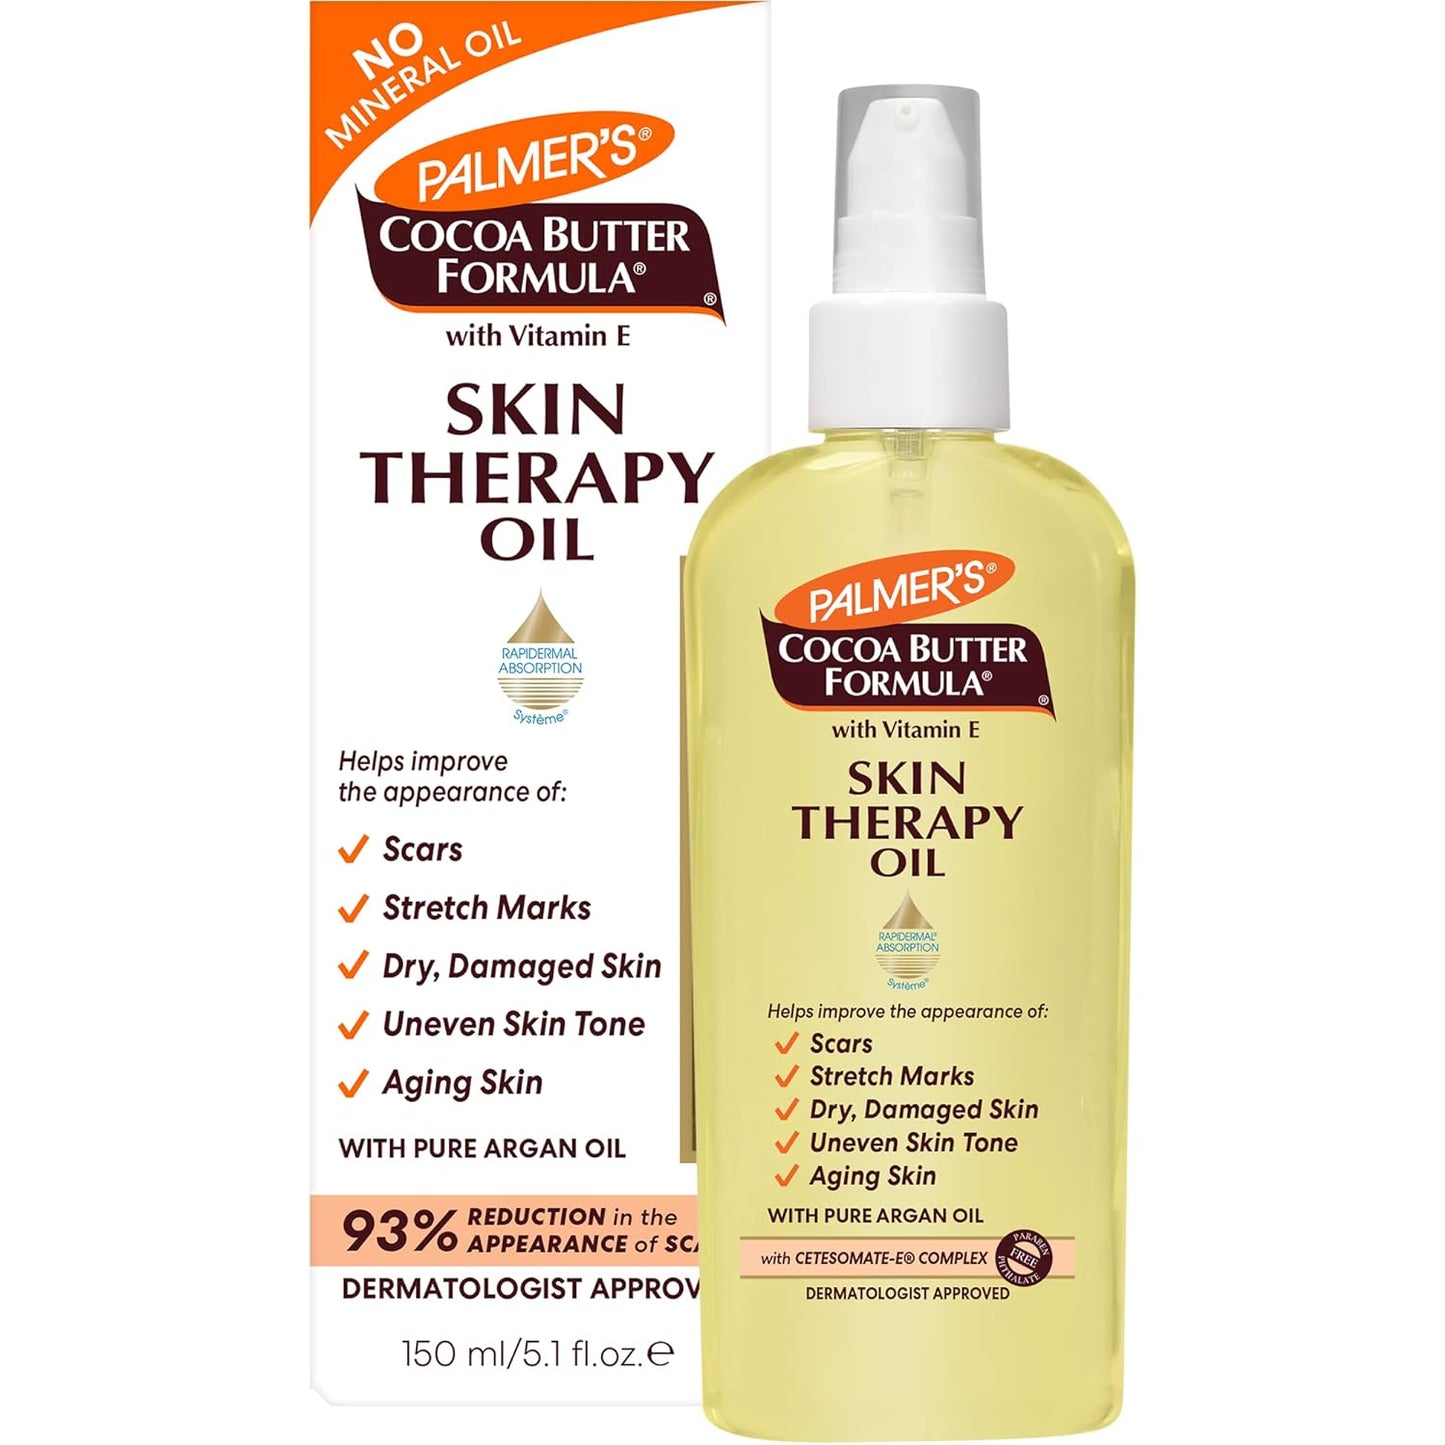 Palmer's Cocoa Butter Formula Face Therapy Oil Enriched with Vitamin E, C & 10 Pure Facial Oils, Infused with Rosehip Fragrance